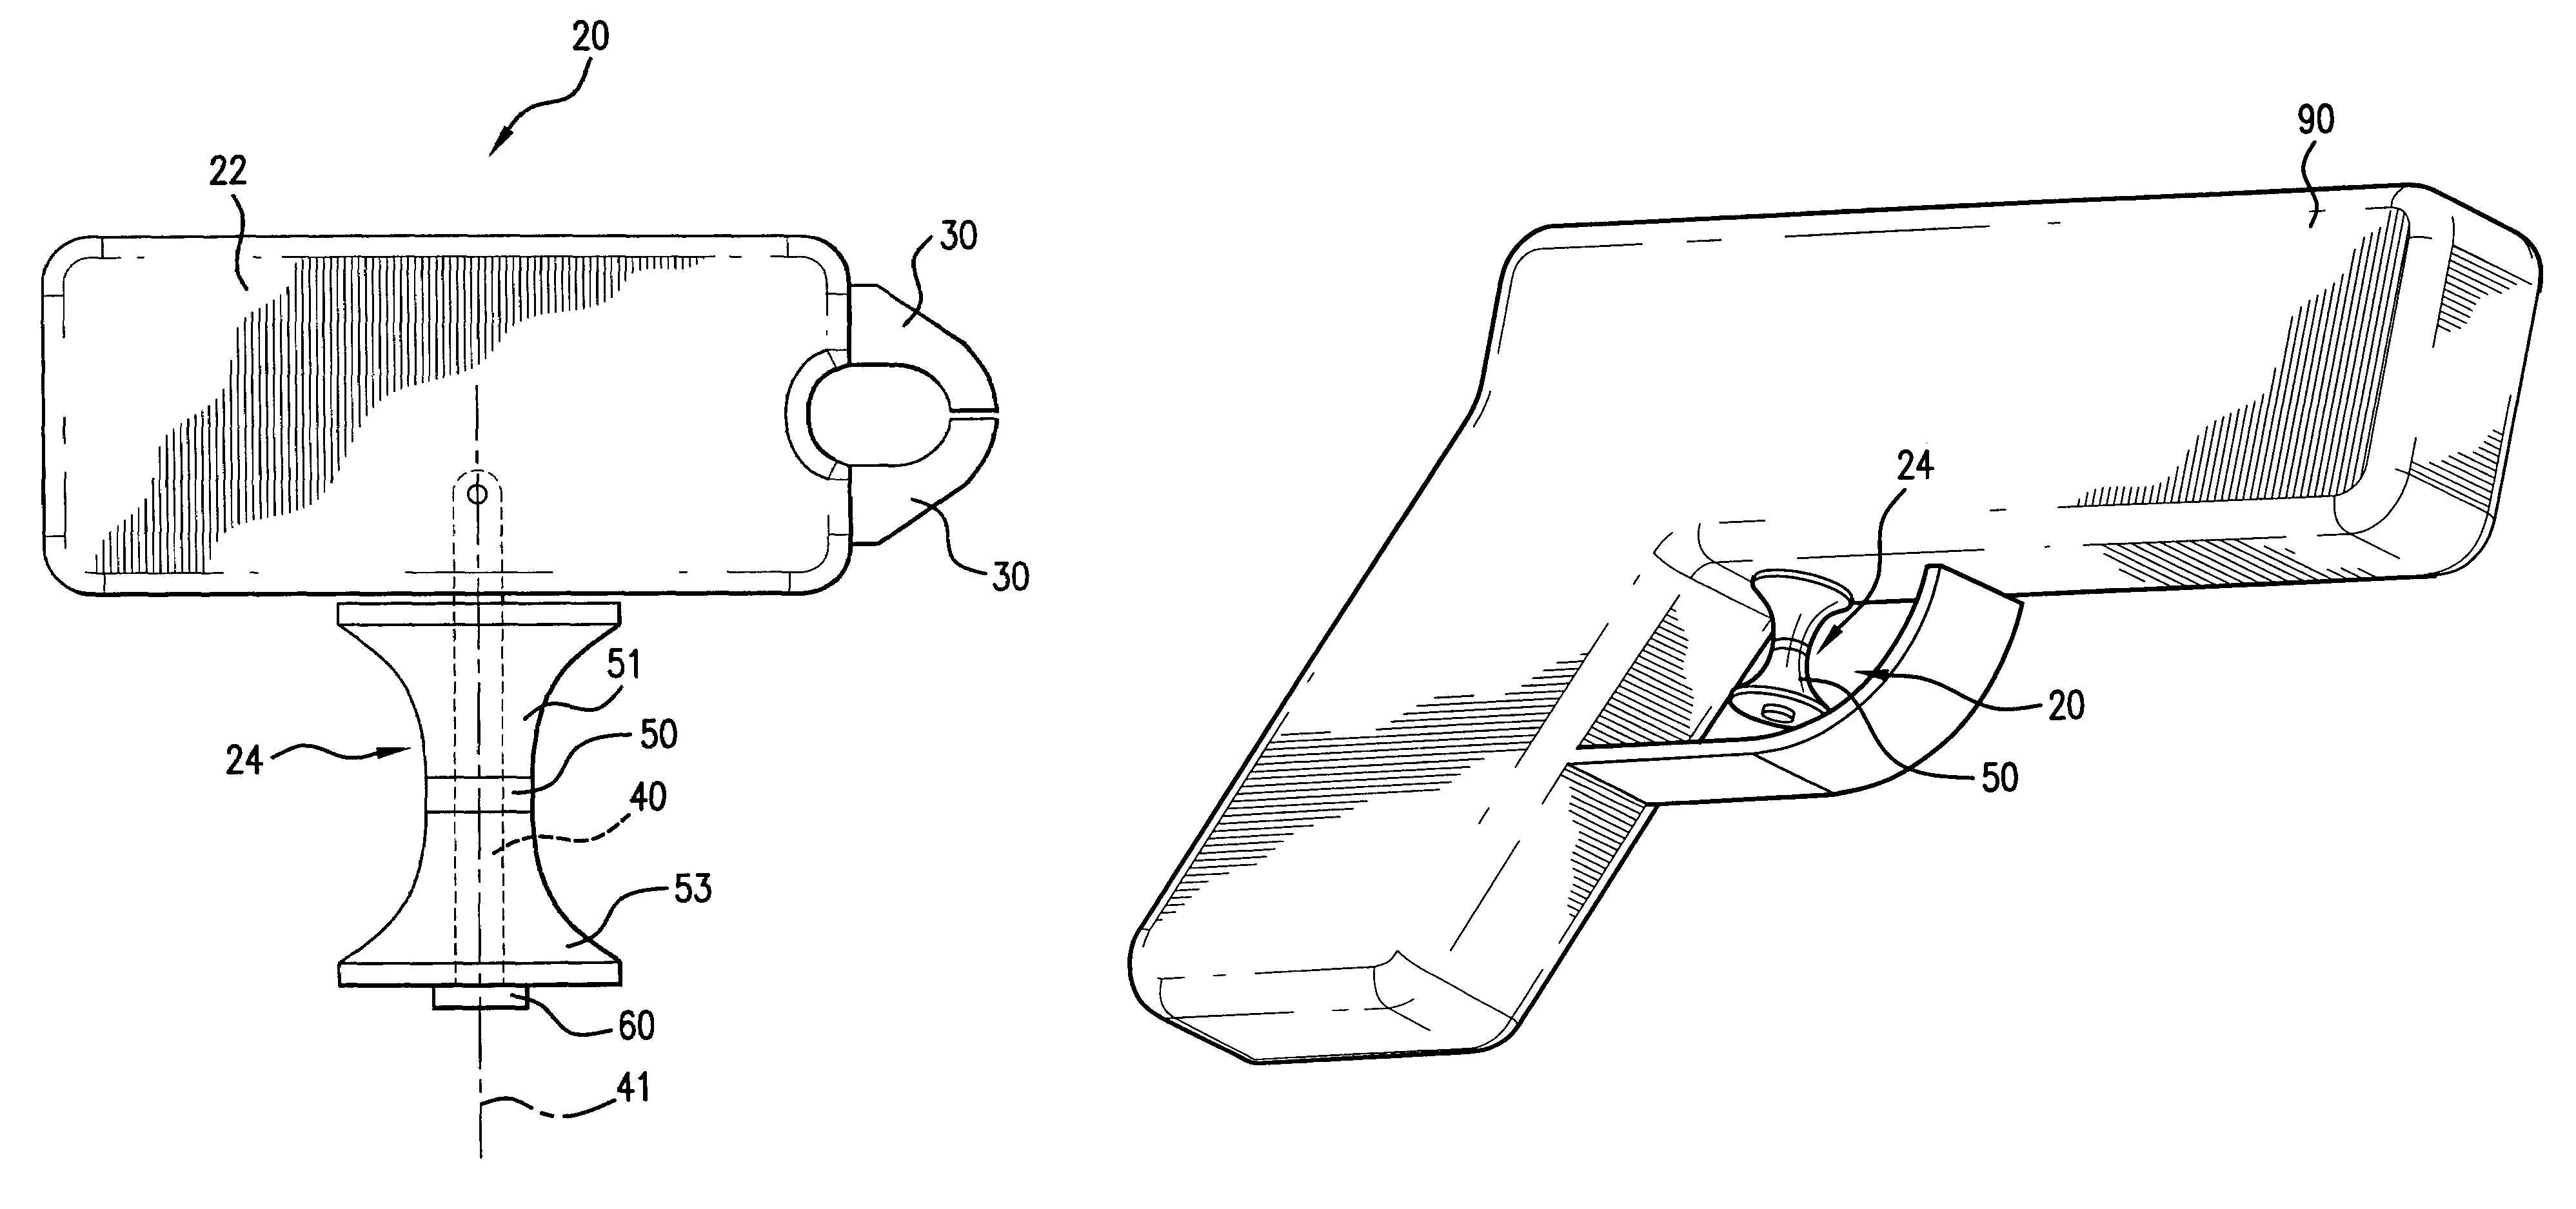 Mechanical release or trigger device